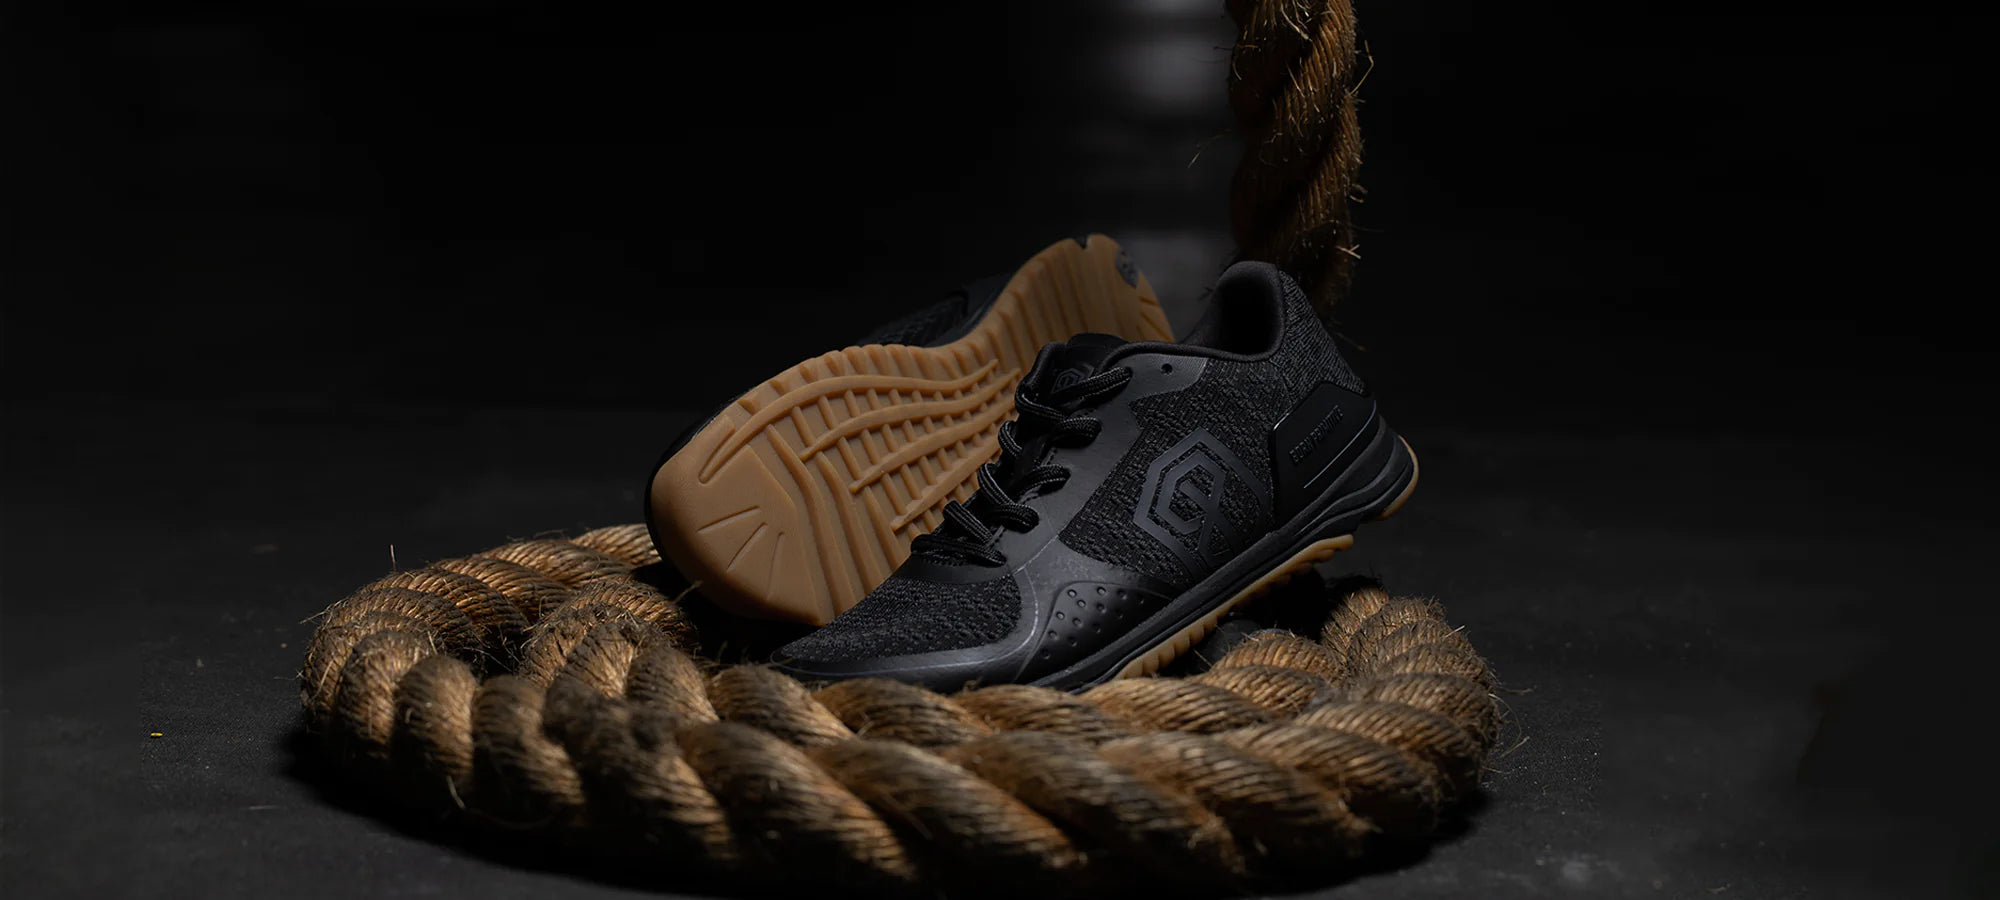 Born Primitive Launches Its First Performance Shoe With Its 'Savage 1' -  Muscle & Fitness